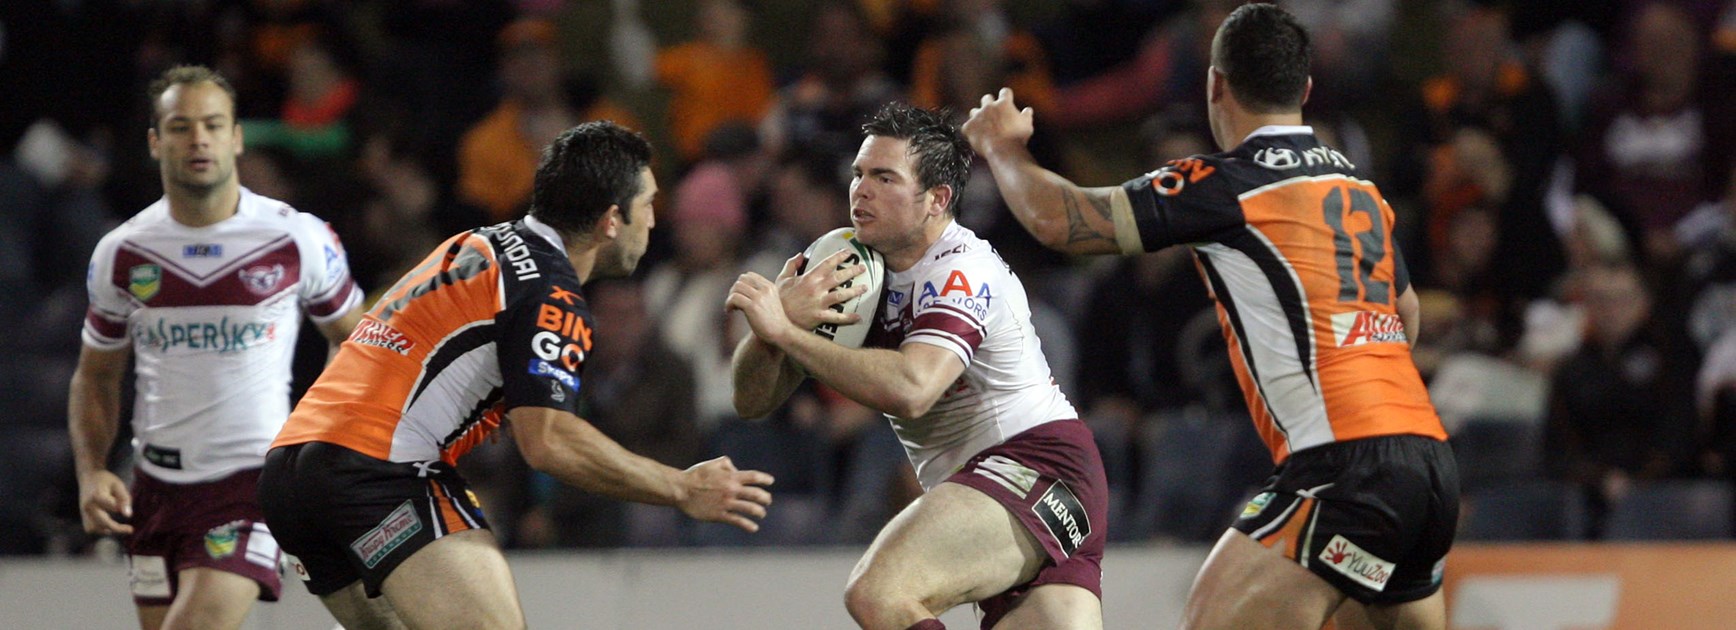 Manly's 2013 win over Wests Tigers at Campbelltown